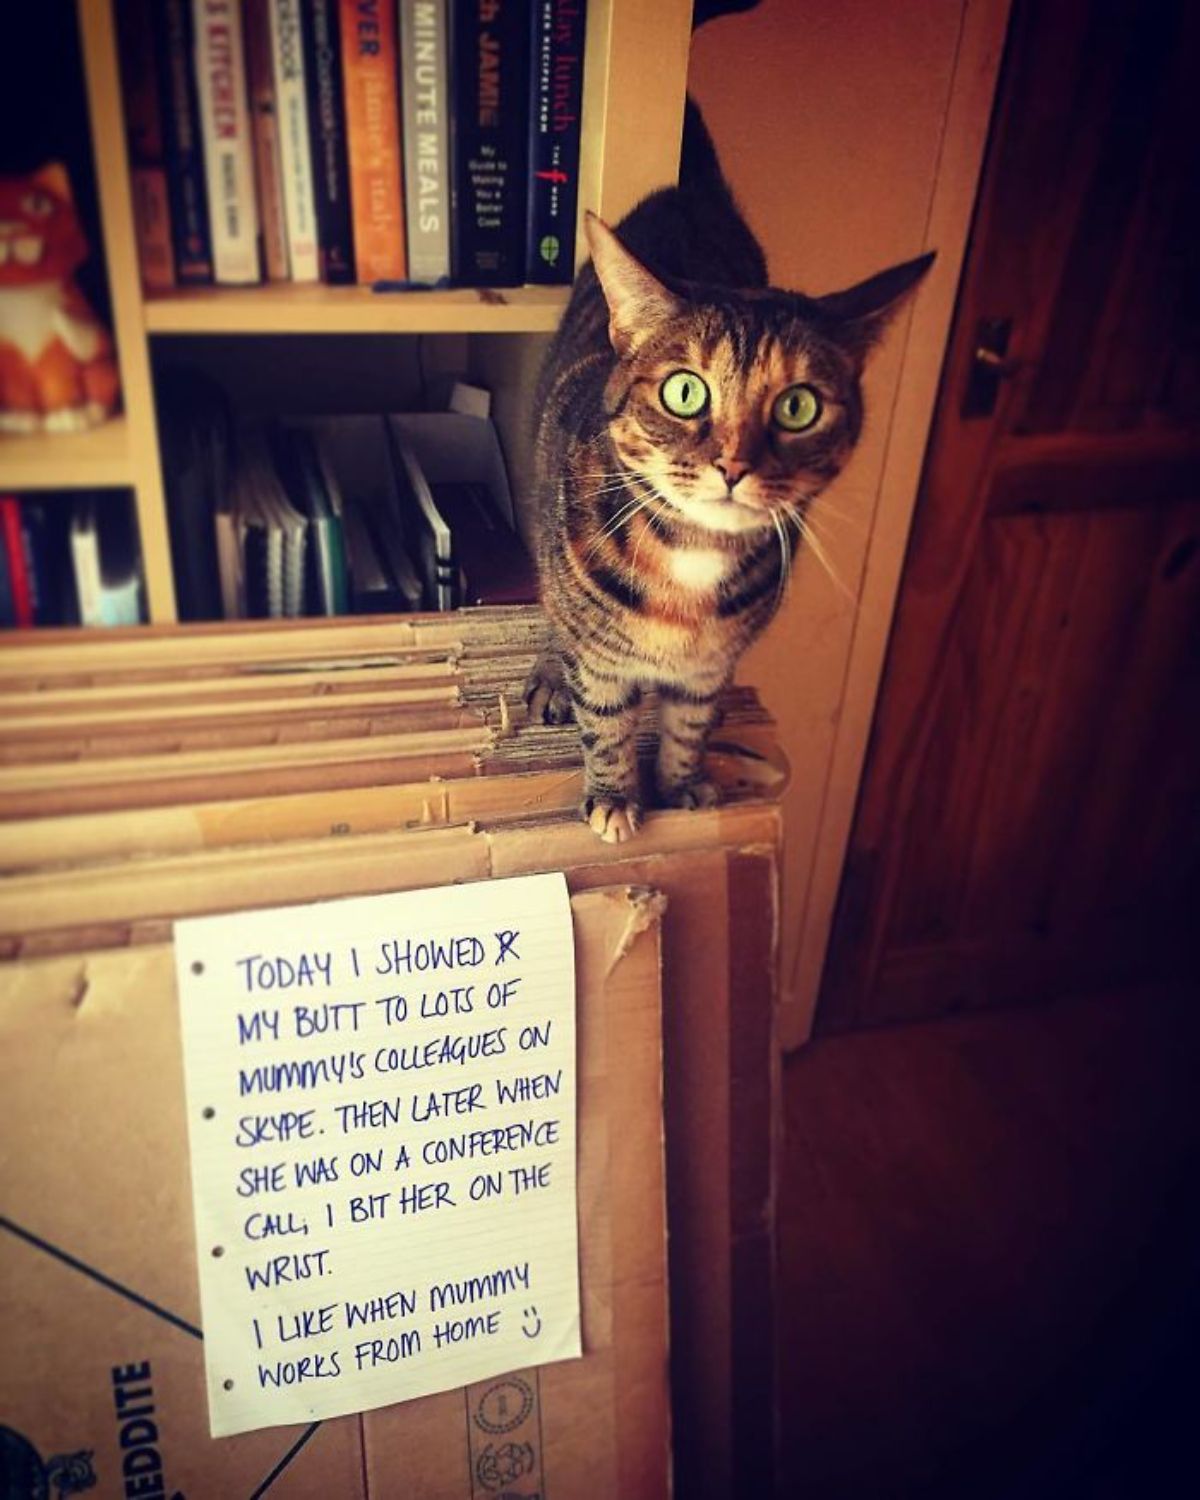 brown tabby cat standing on a stack of folded cardboard boxes in front of a bookshelf with a note saying showed her butt to people on a conference call, bit her mum's wrist and likes when mummy is working from home